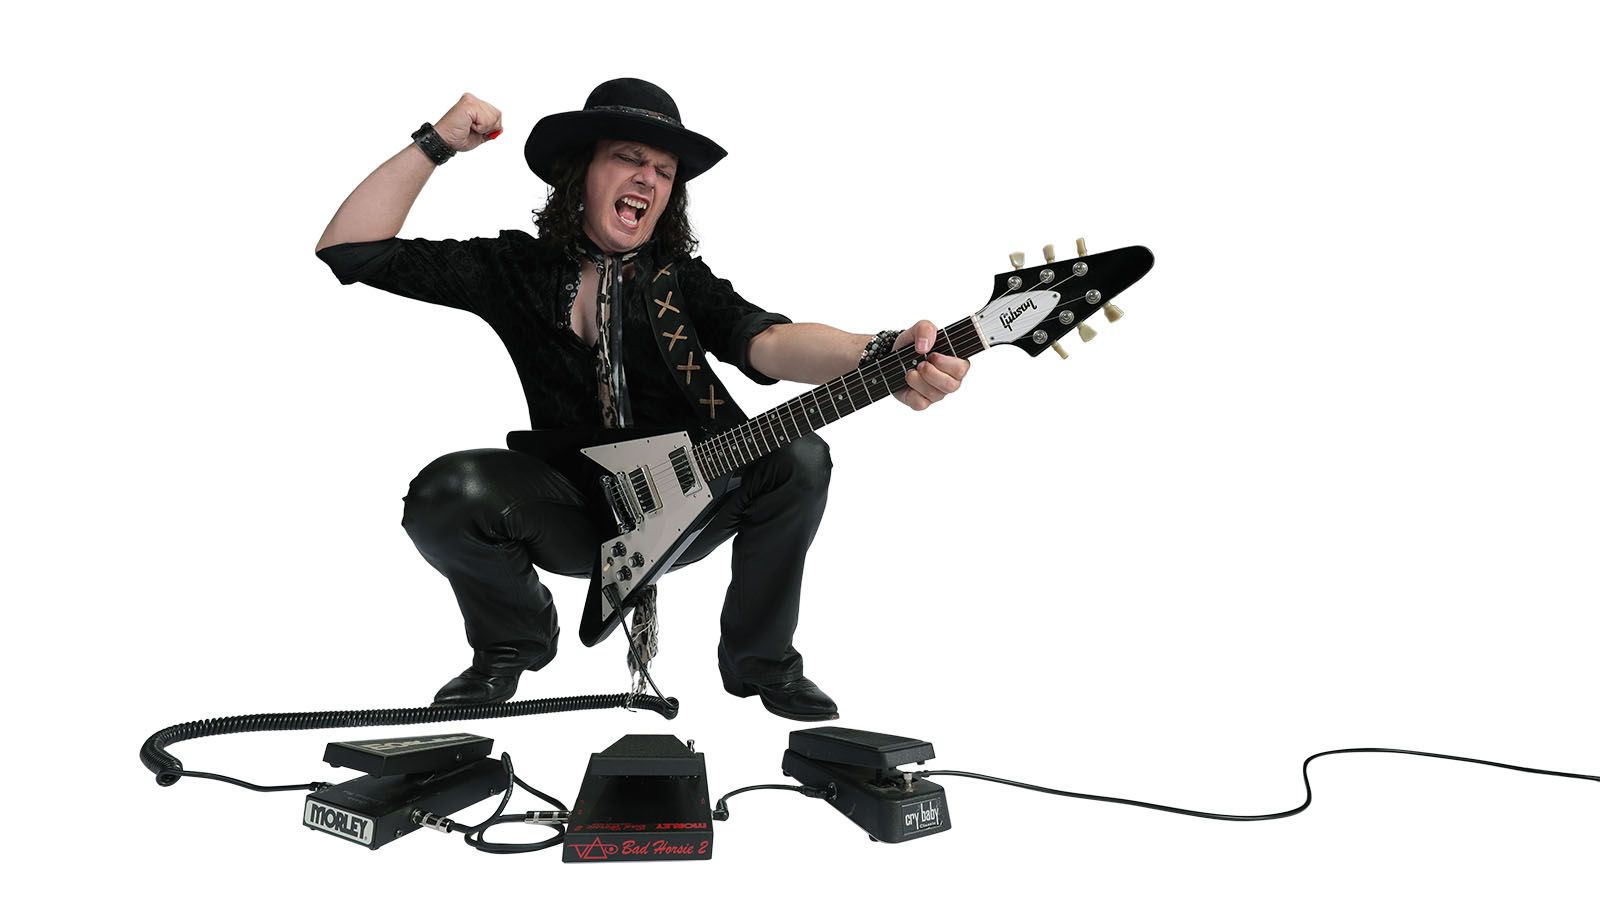 Blues rocker Anthony Gomes will be at Baker Street Centre on Saturday, Feb. 11.